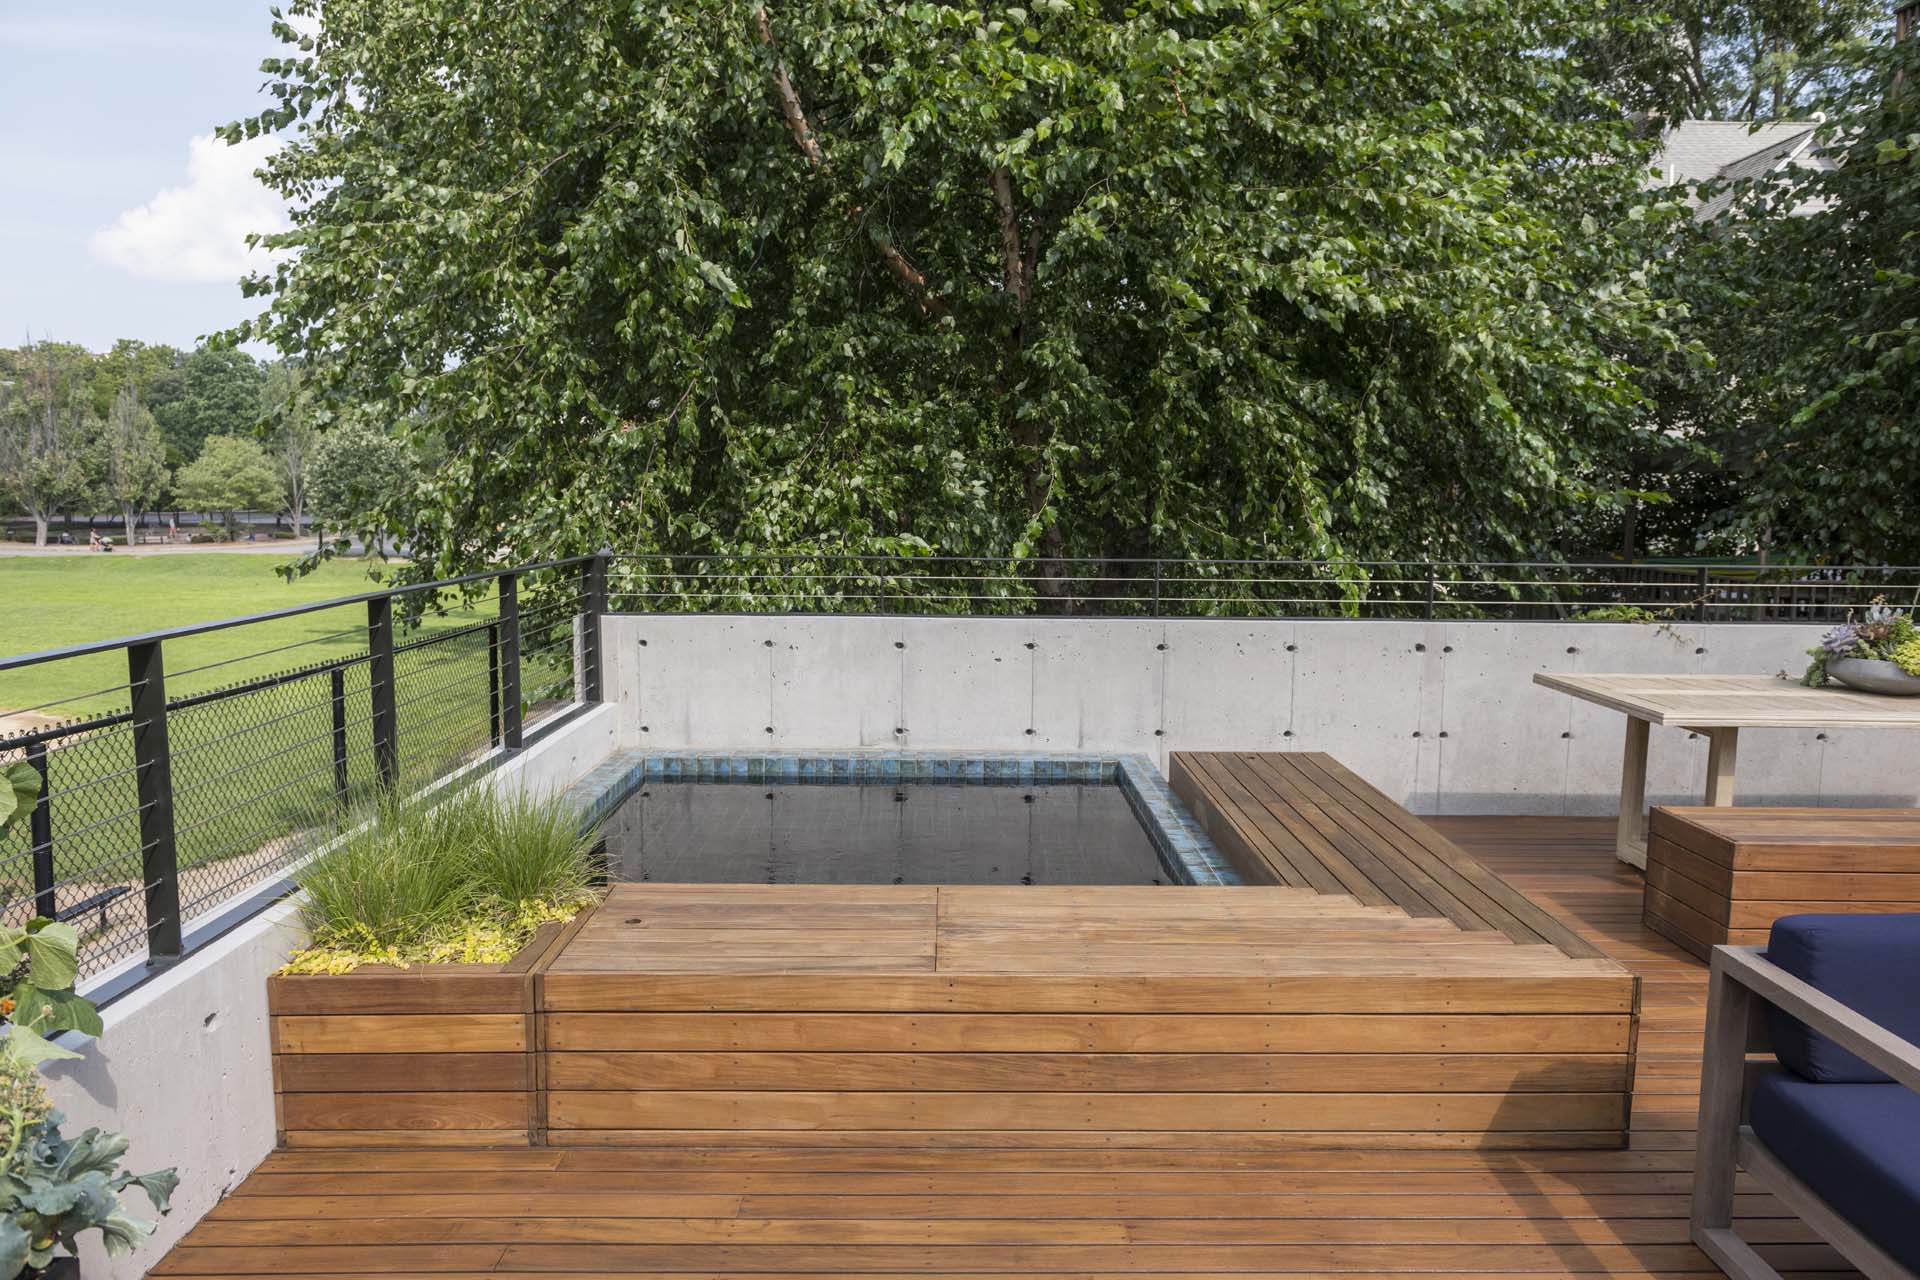 The rooftop deck of this modern concrete garage includes a custom hot tub, a steam room, and a sauna.